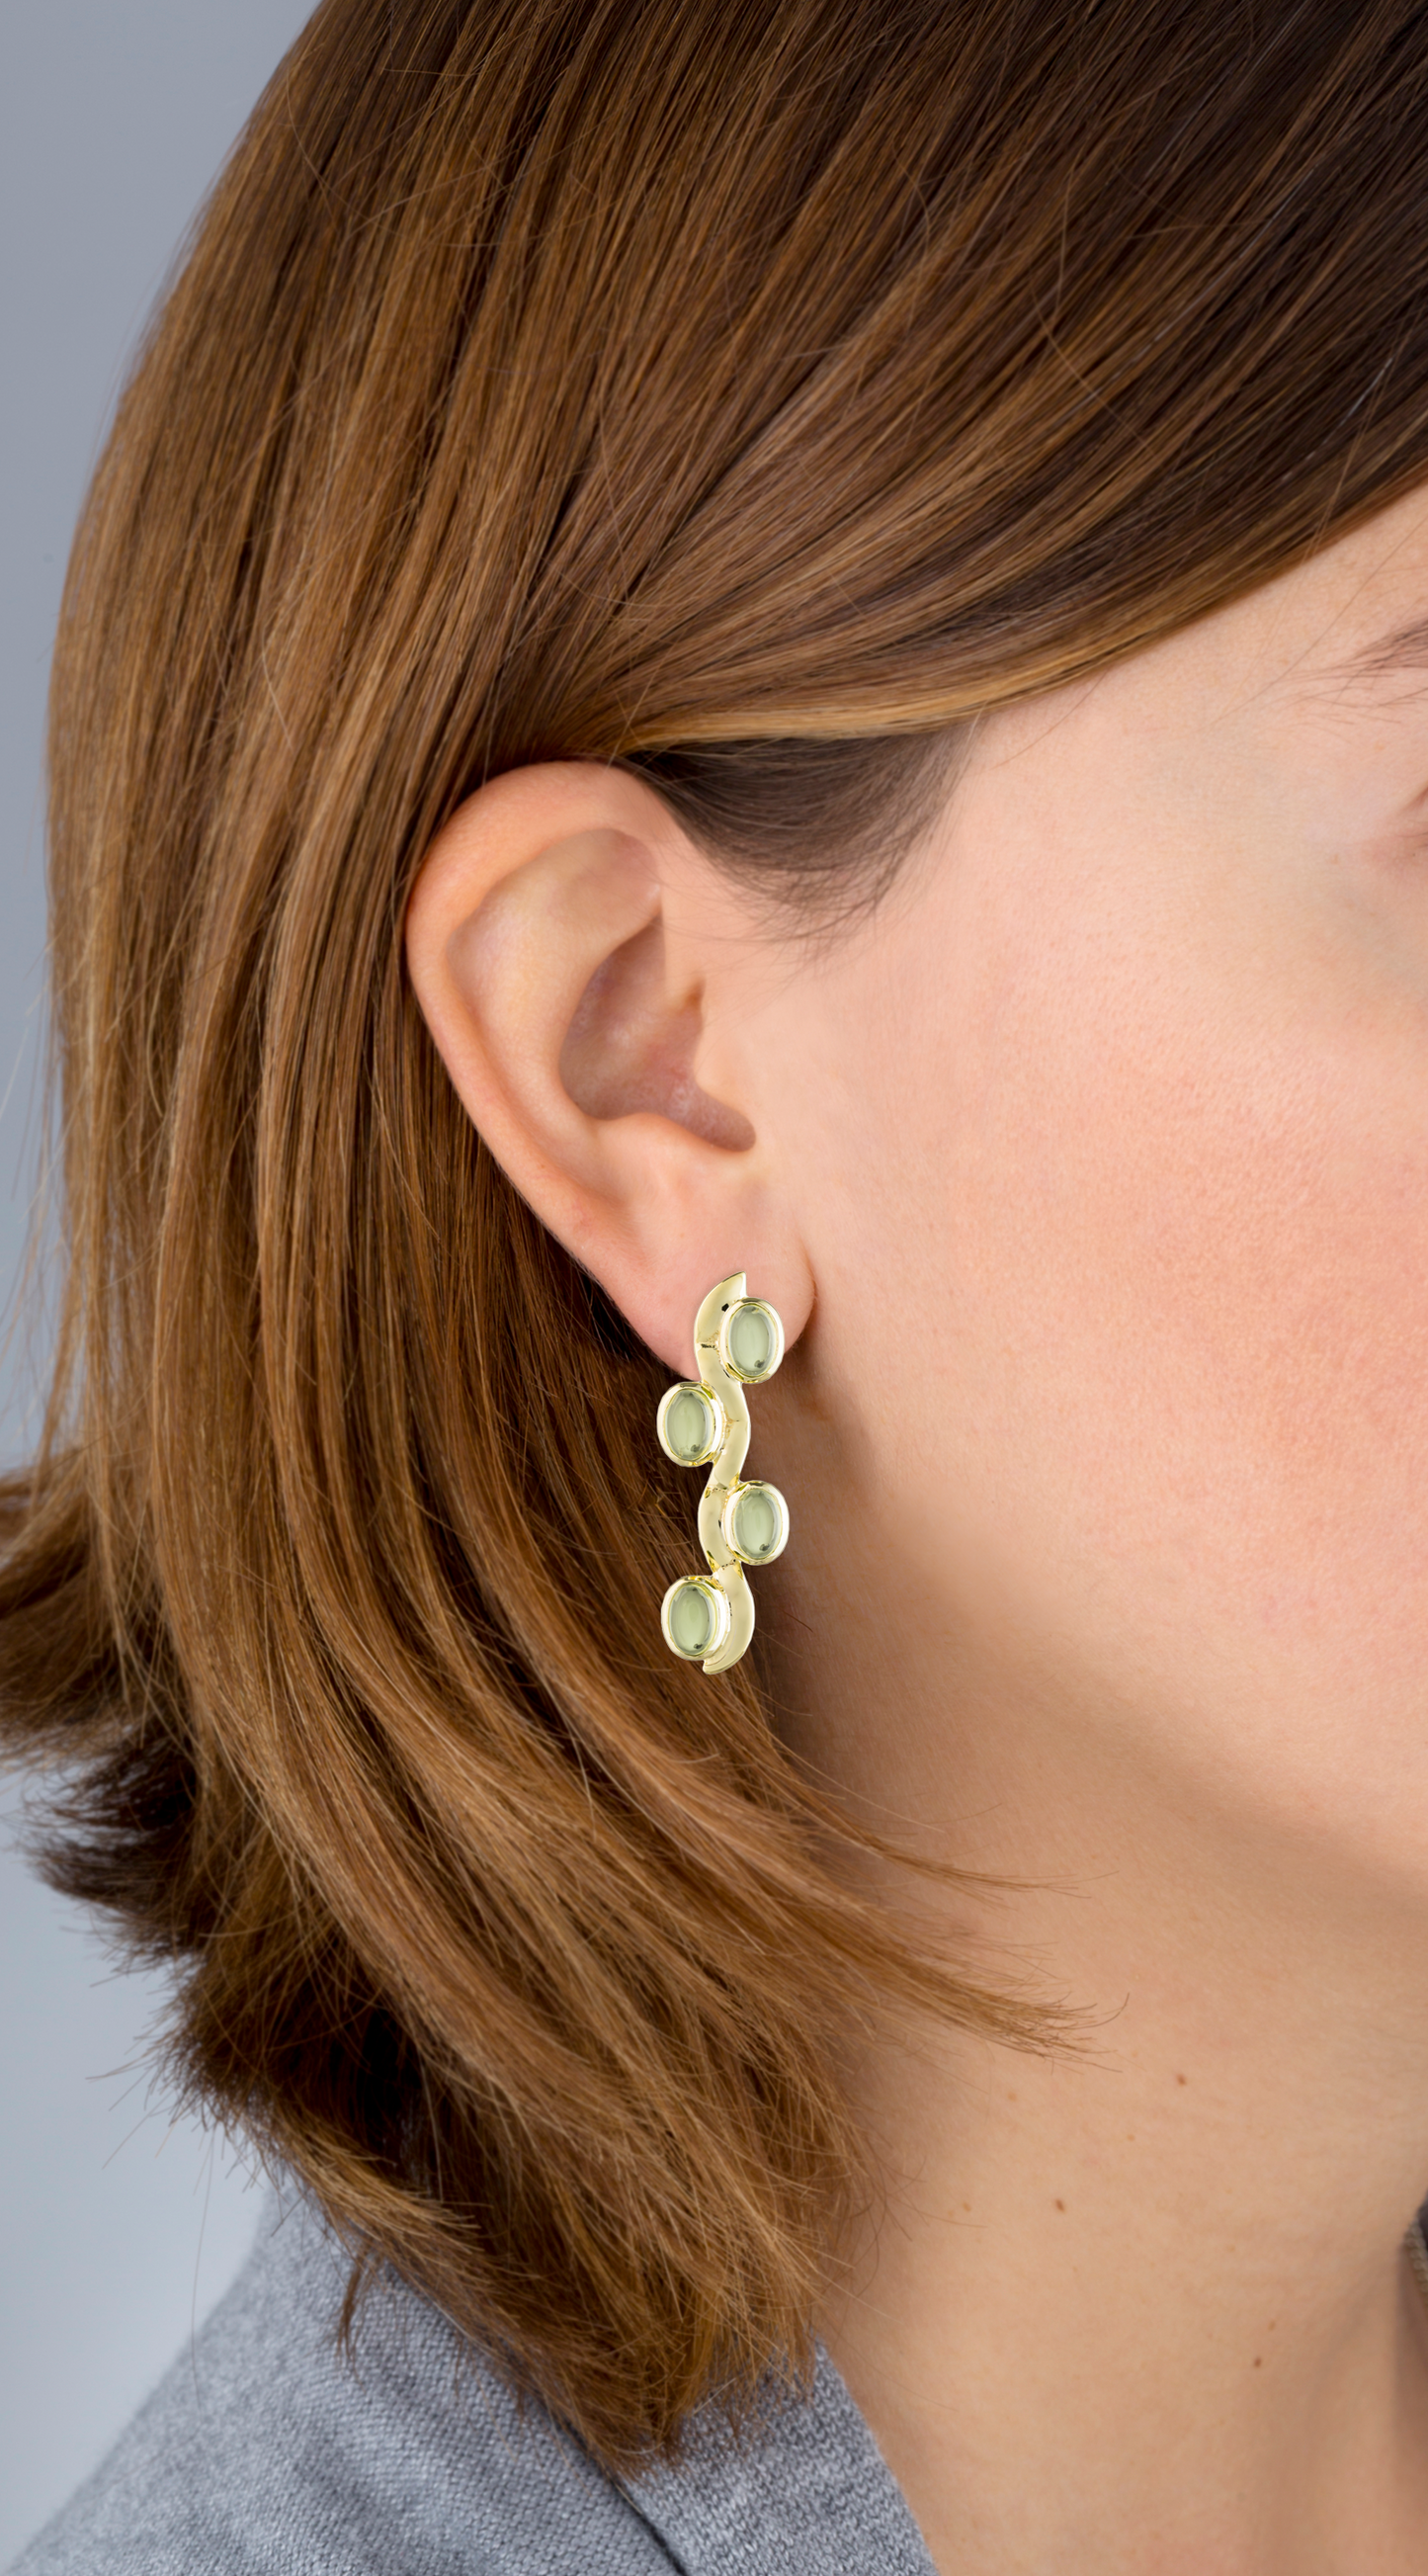 925 Silver Earrings plated in 18k Yellow Gold with Peridot Cabouchon.